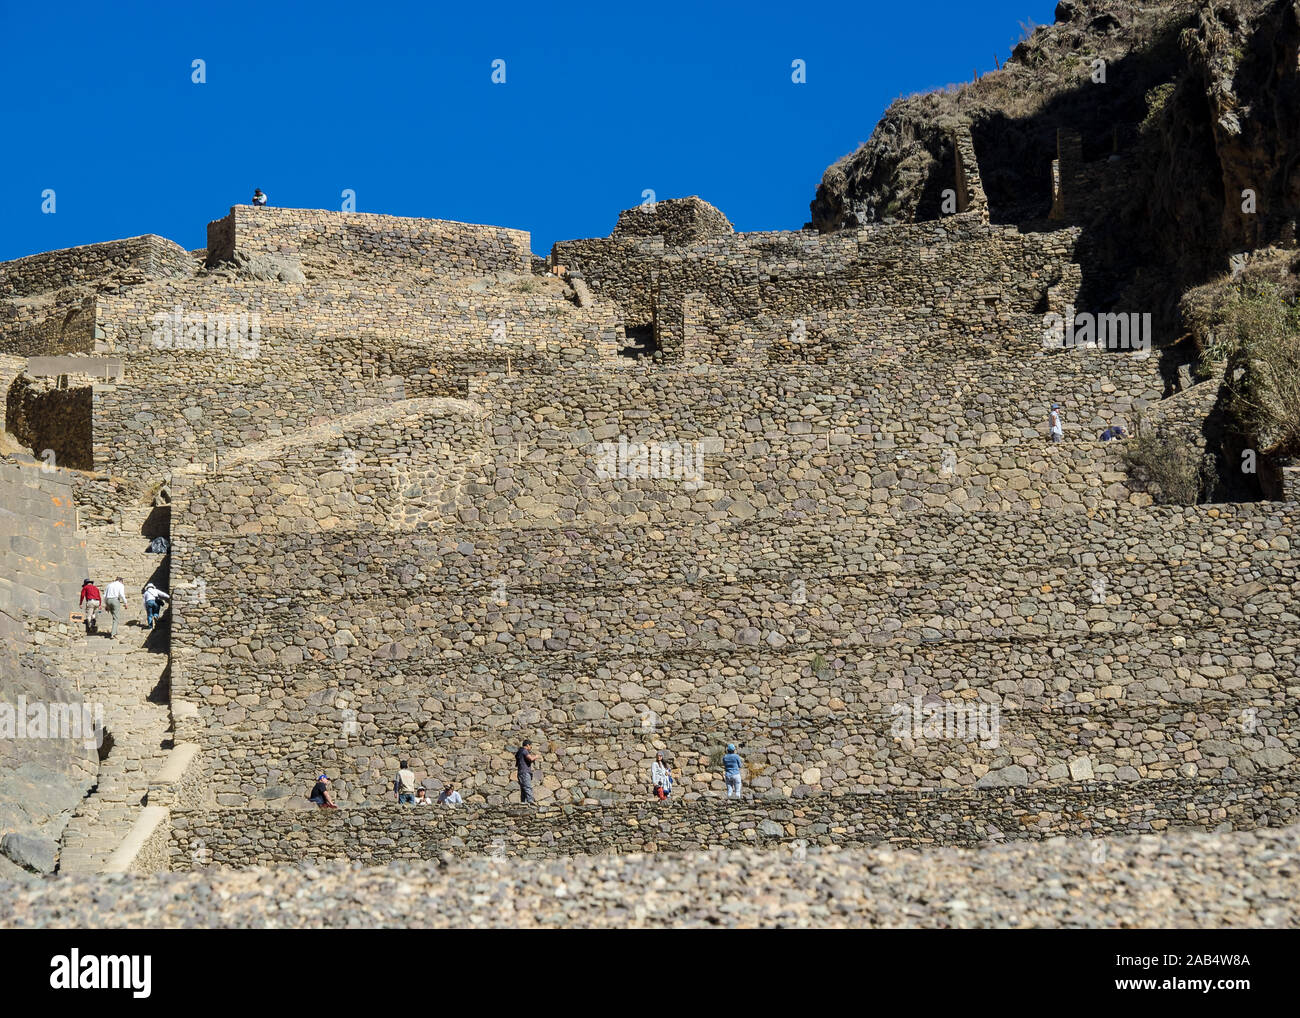 Ollantaytambo ruins, a massive Inca fortress with large stone terraces on a hillside Stock Photo